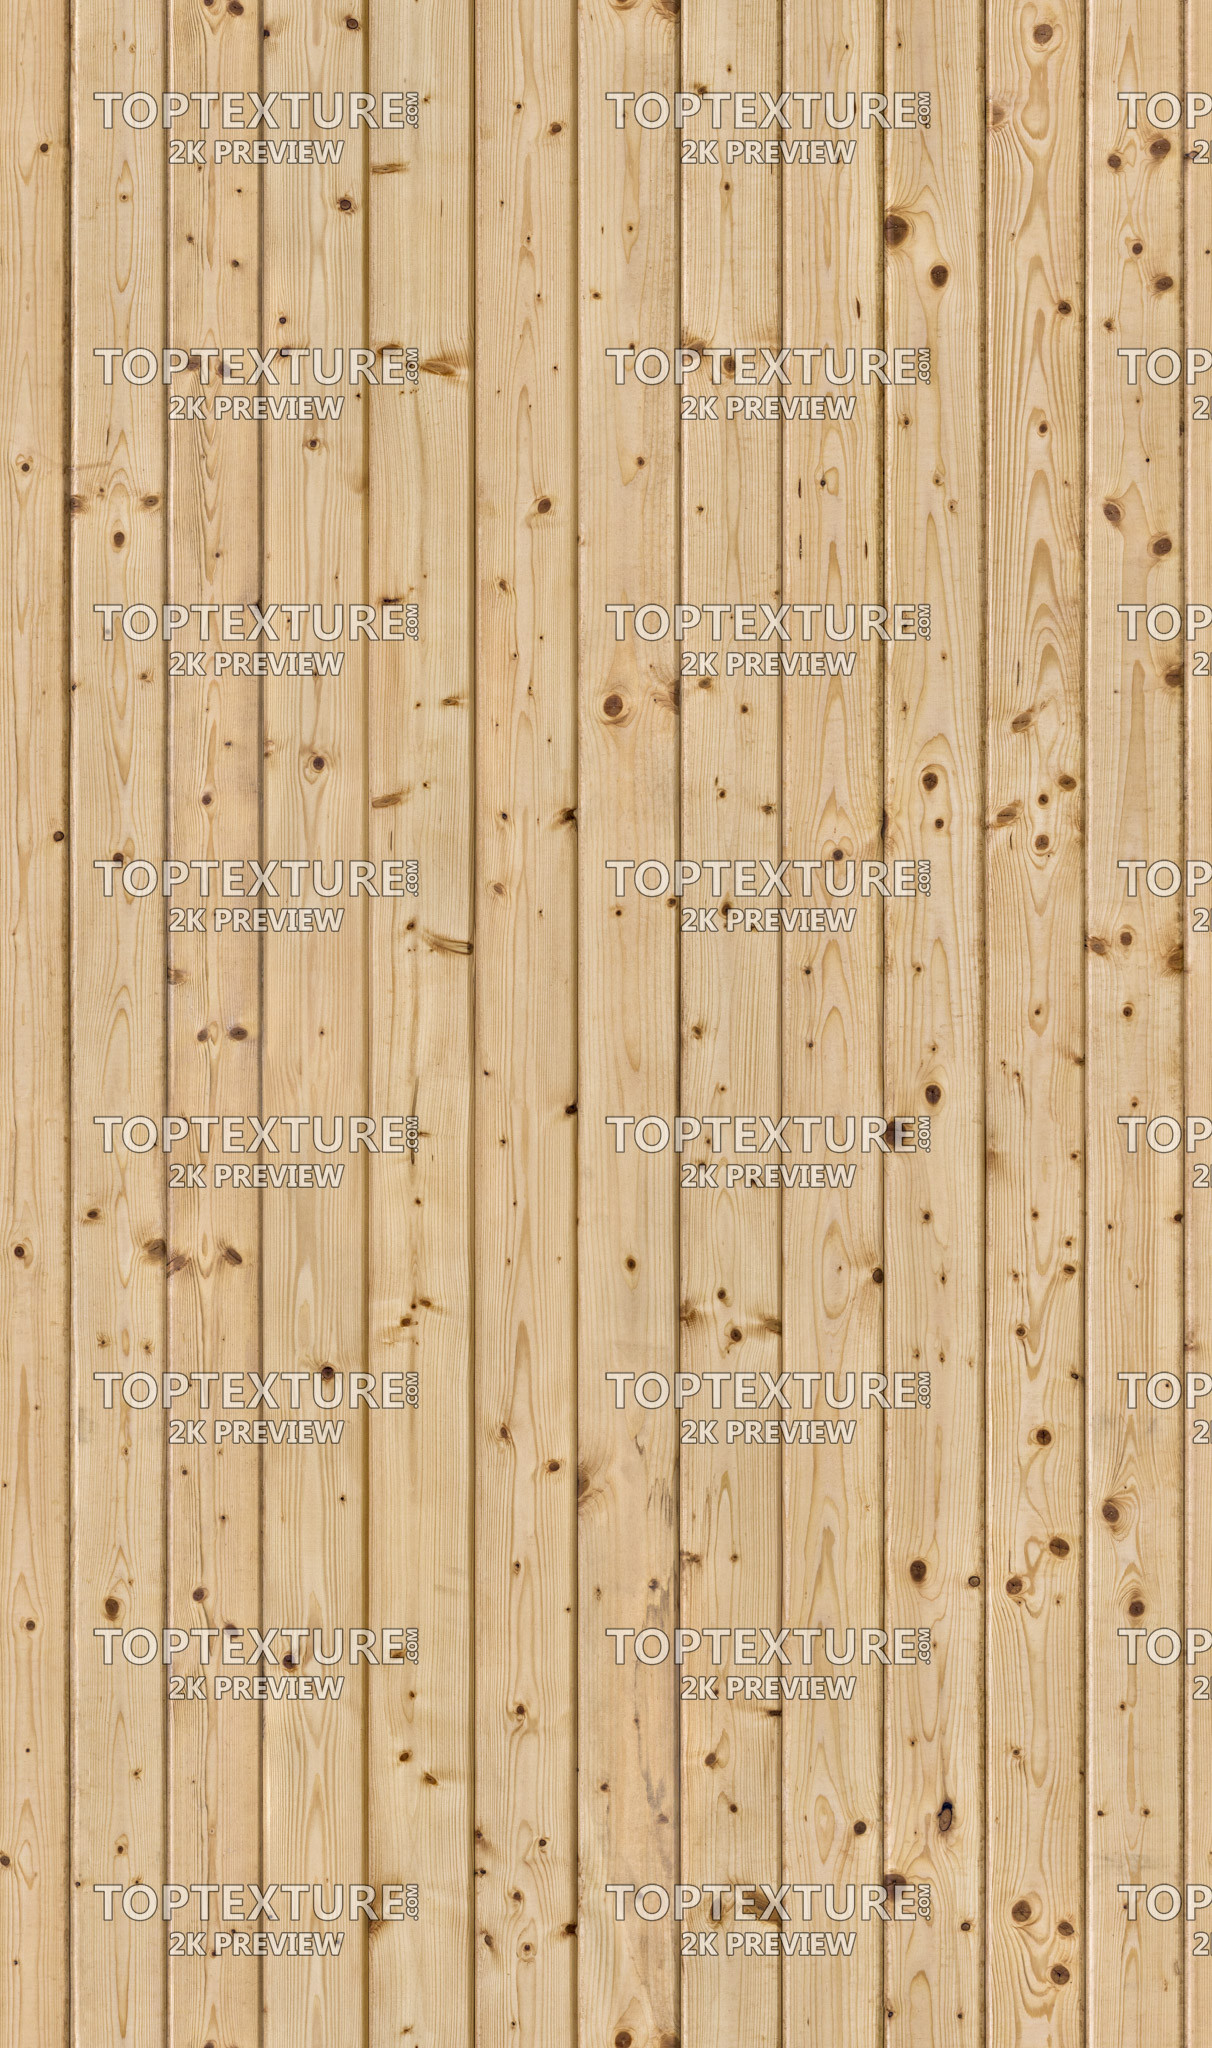 Light Wood Planks with Knags - 2K preview